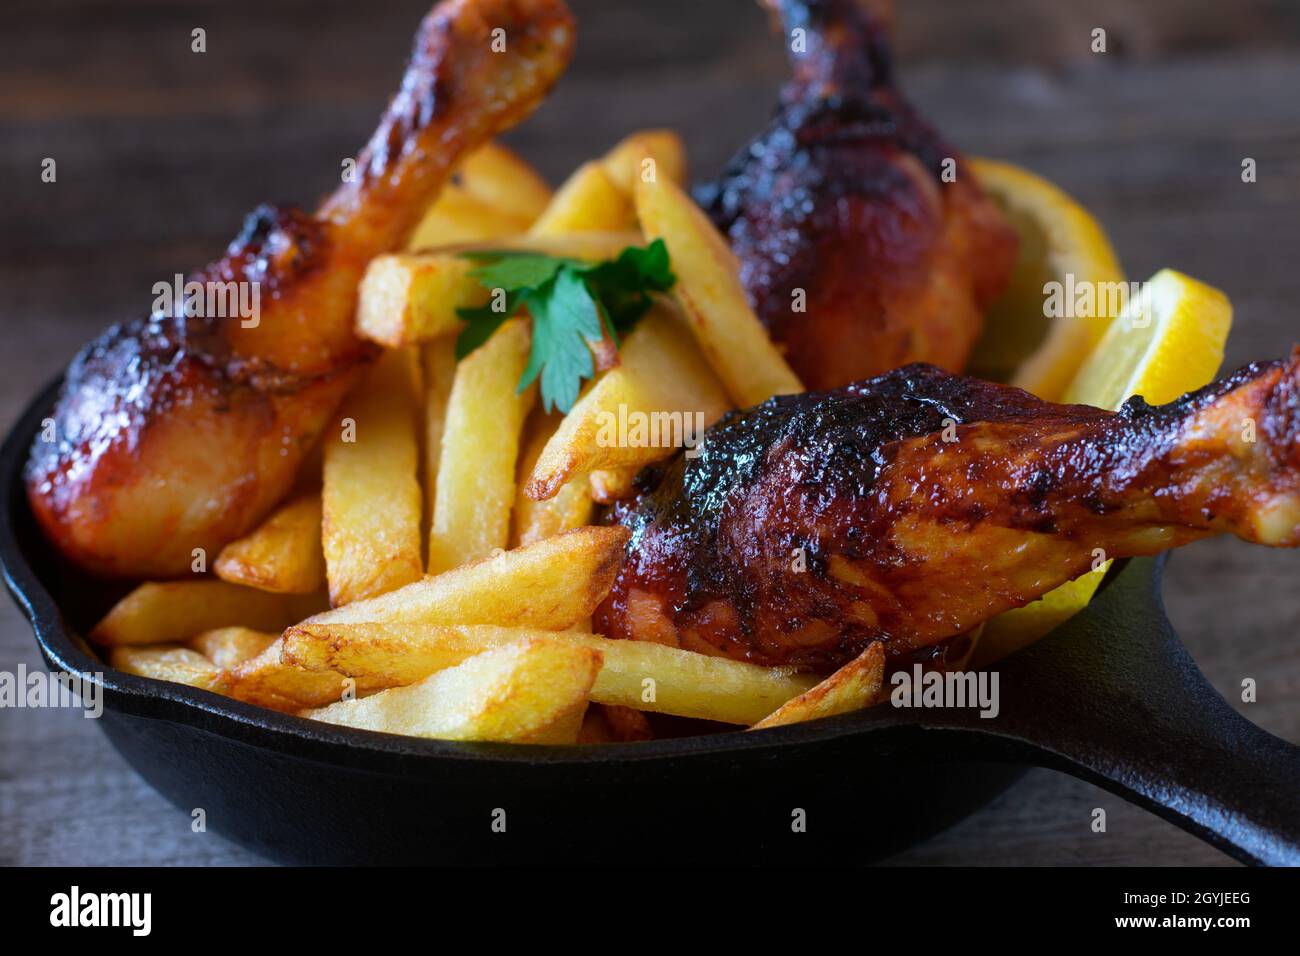 Marinated chicken drumsticks with homemade fresh fried french fries served on rustic, wooden table. Isolated and closeup view Stock Photo